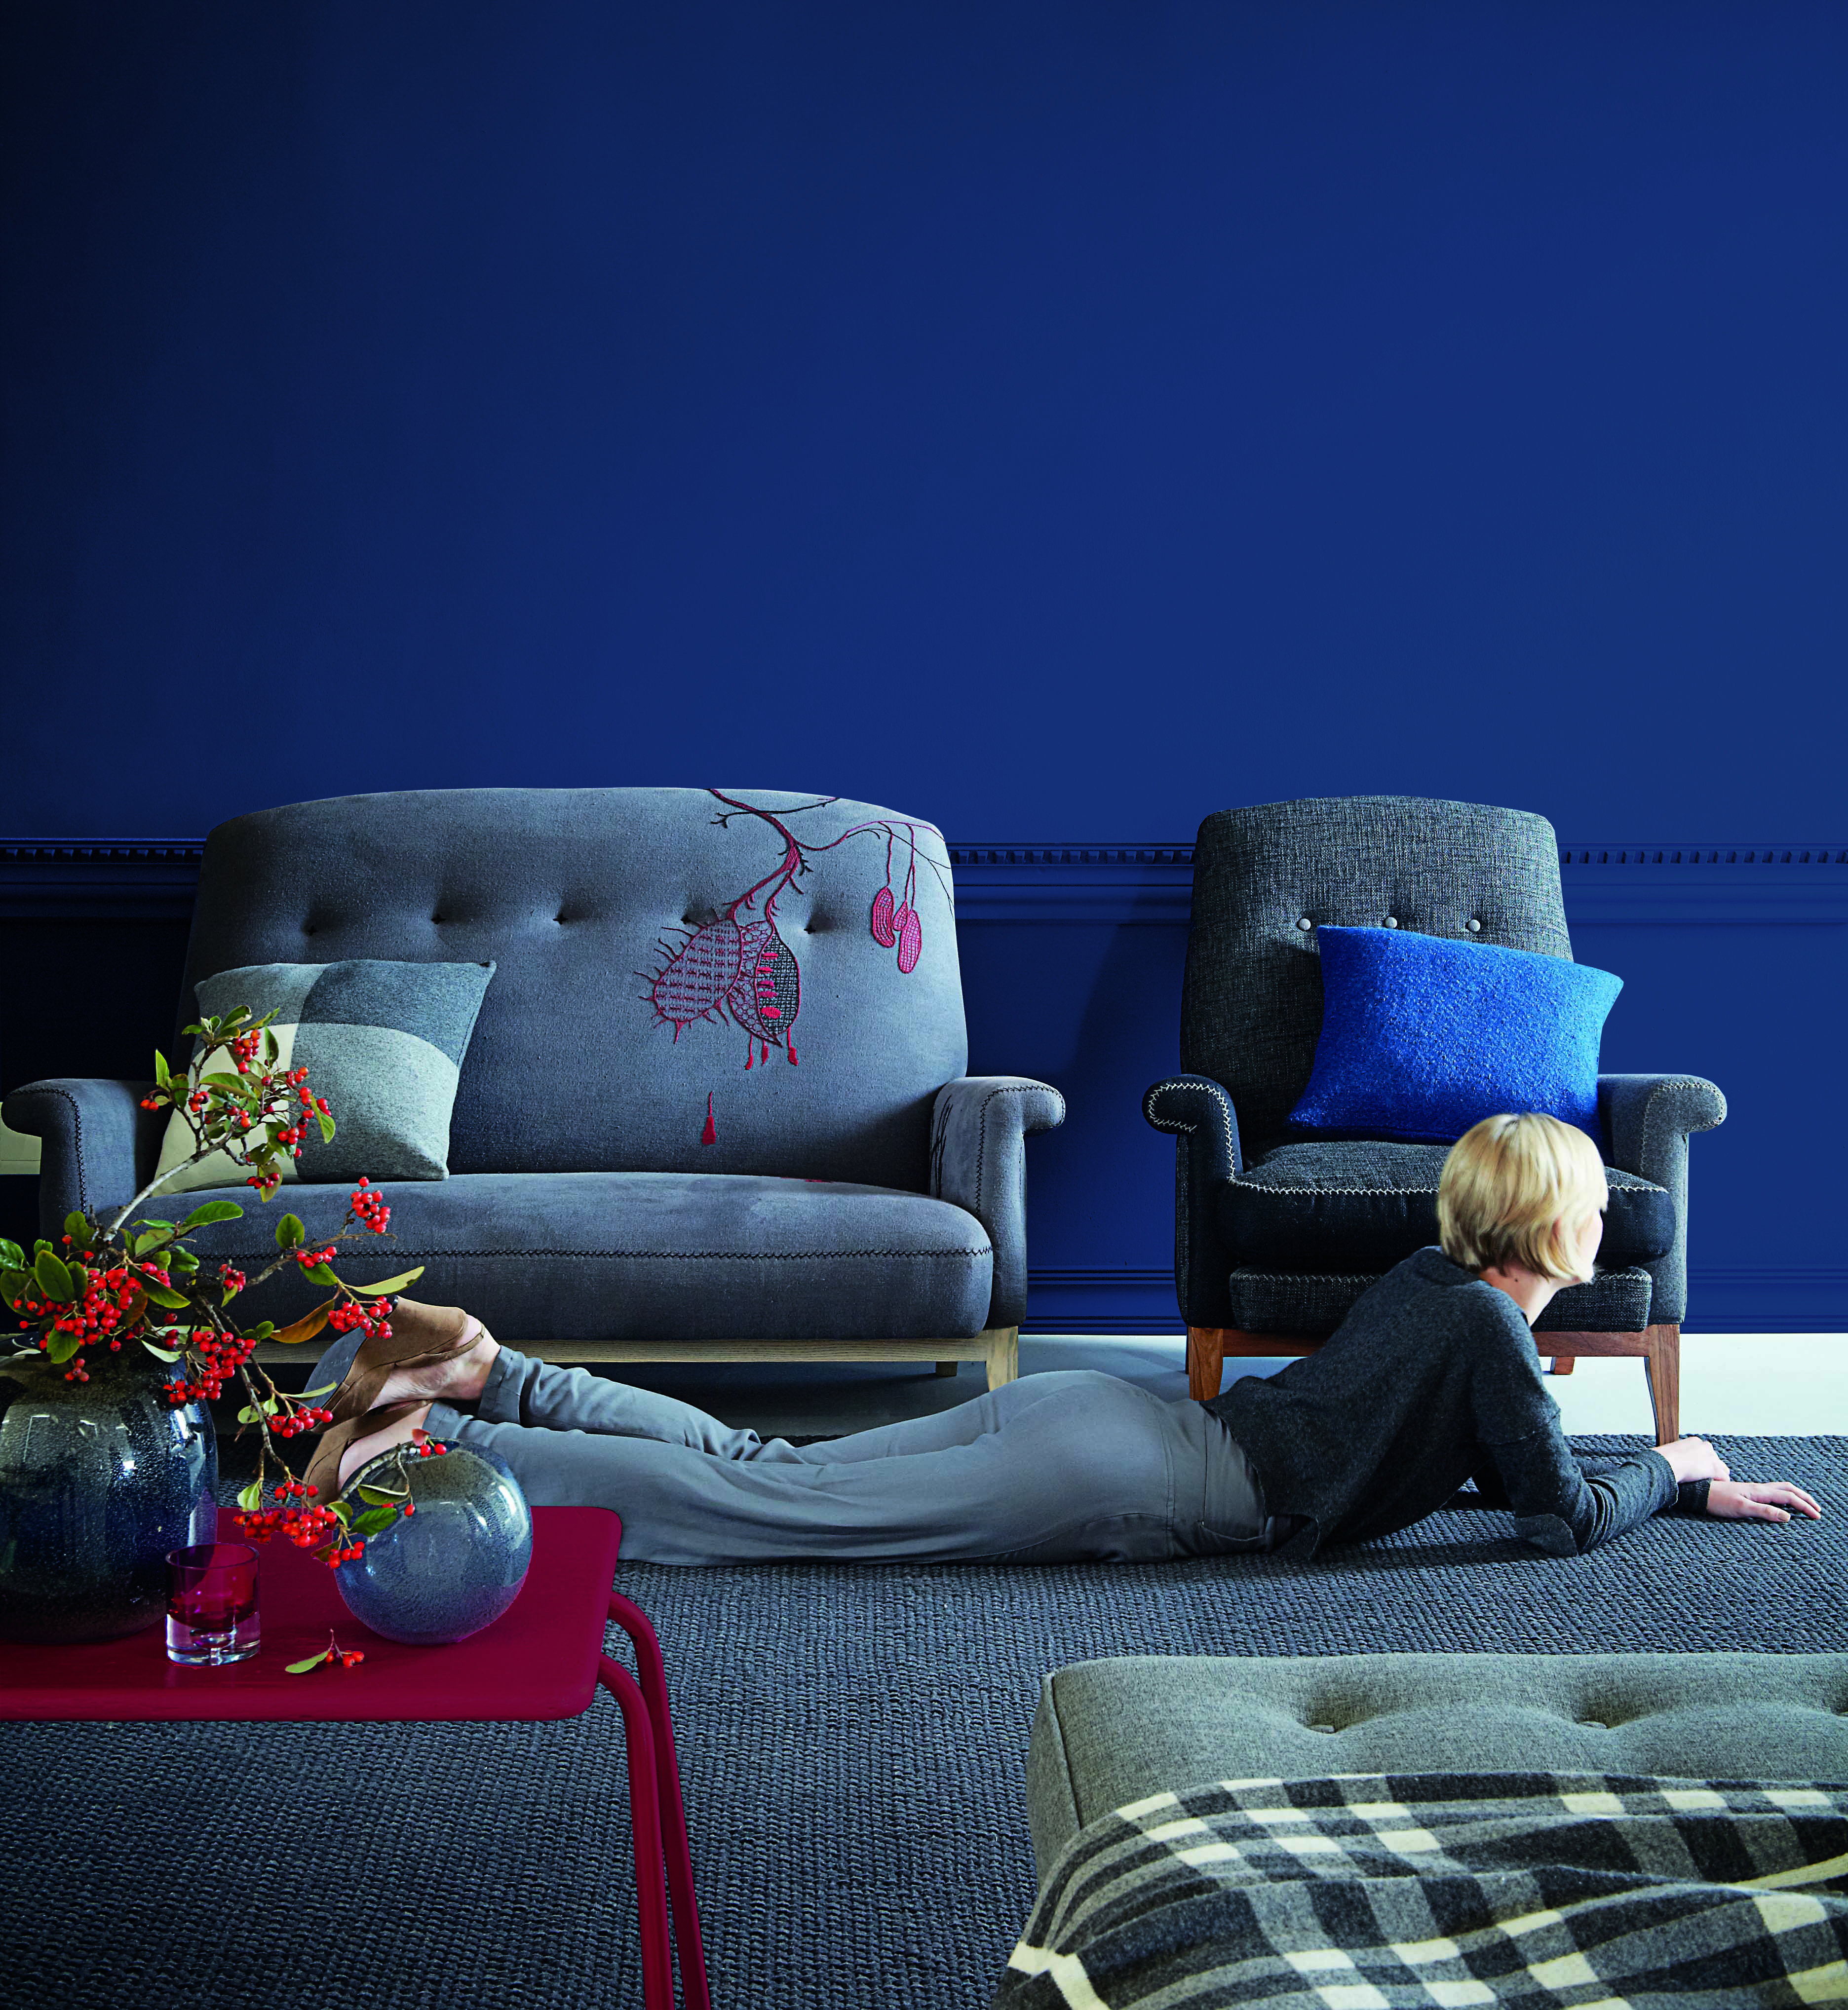 This Winter Don T Be Afraid Of The Dark When It Comes To Interior Trends Says The Plascon Colour Advice Team Design News